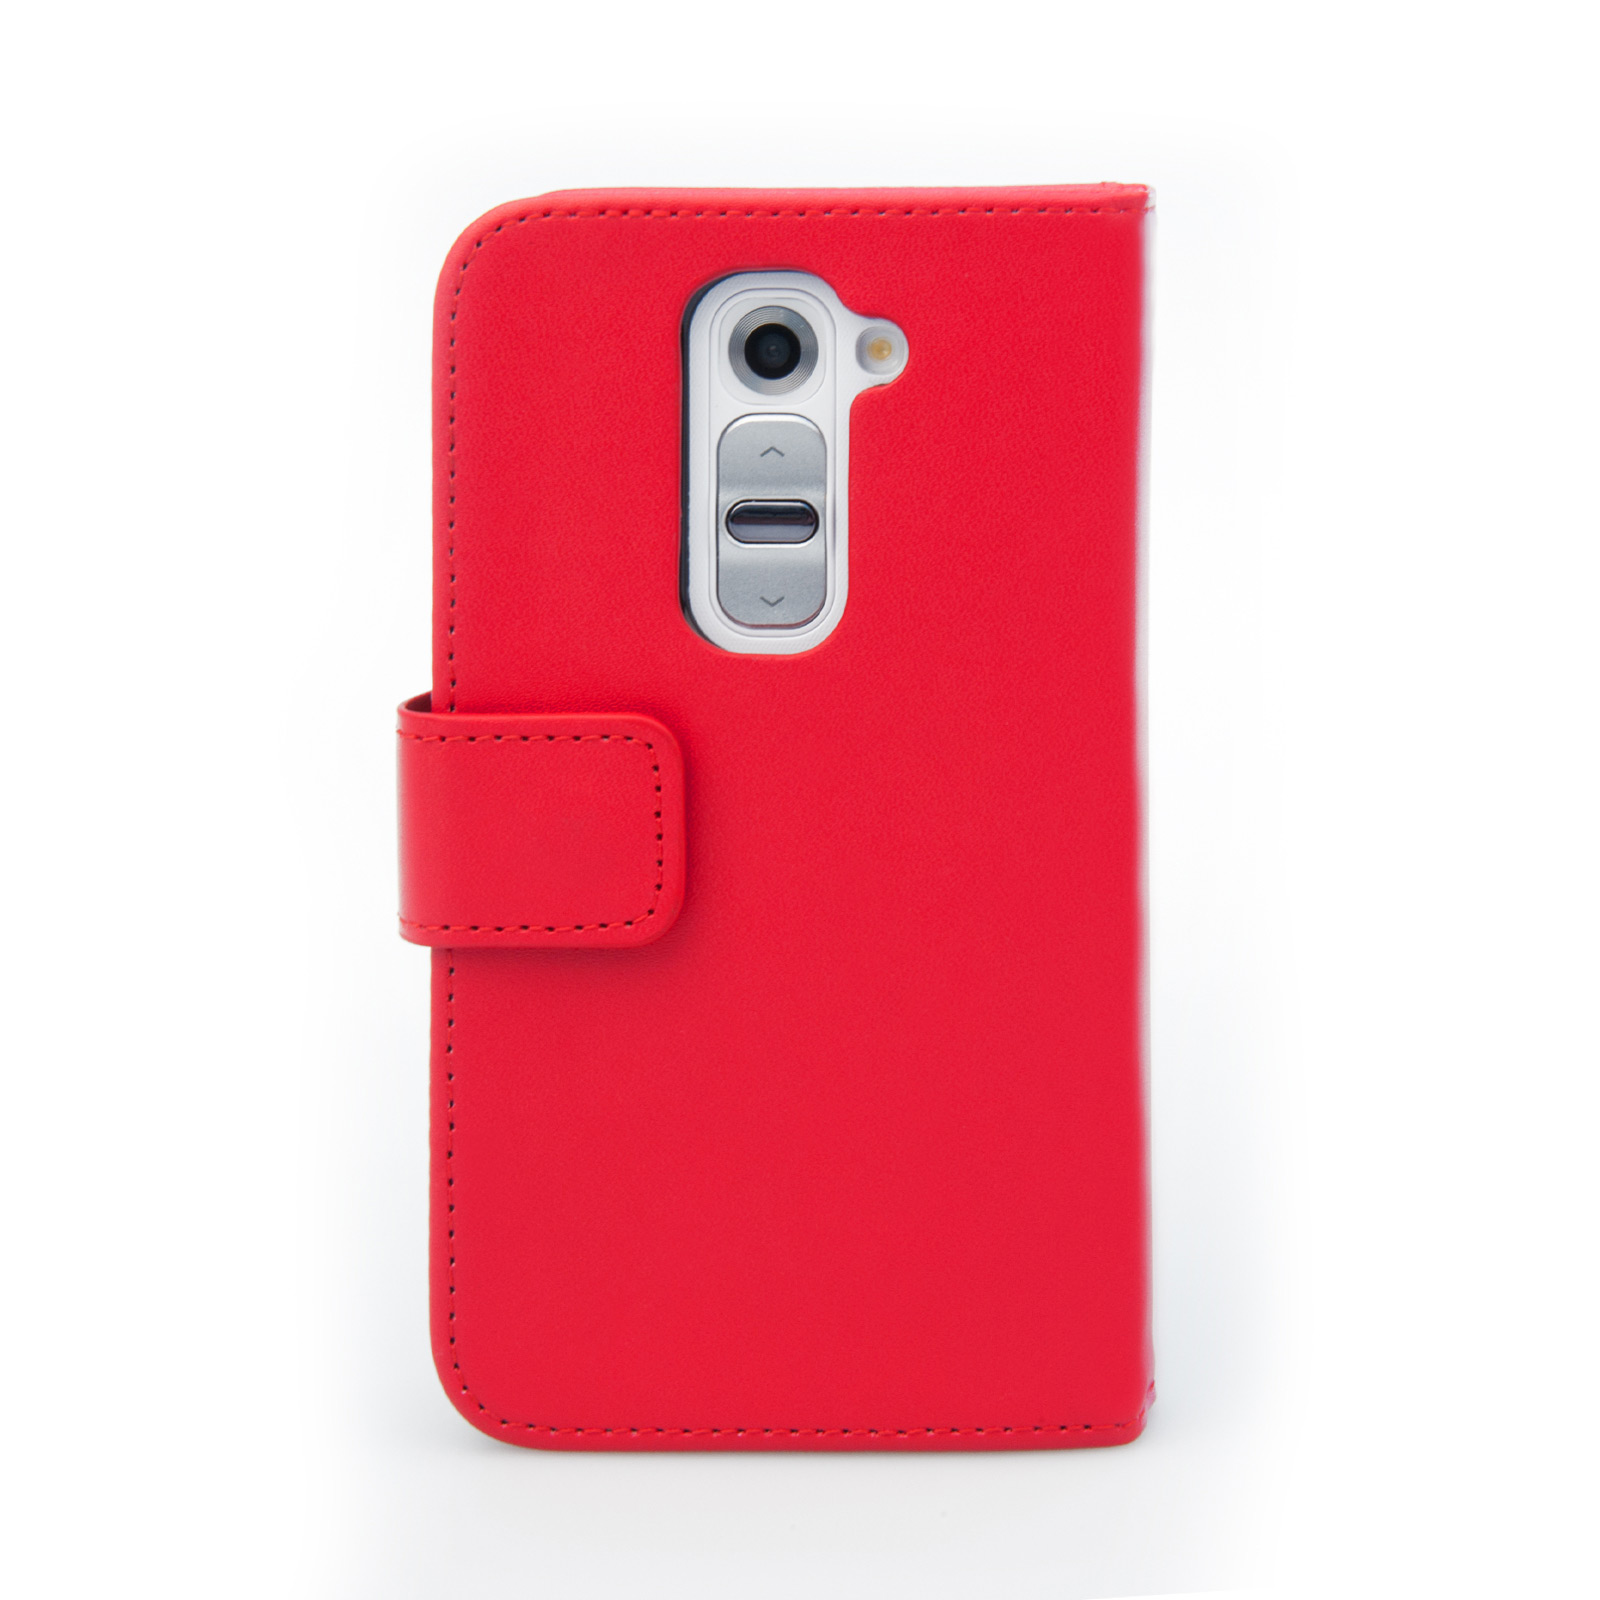 YouSave Accessories LG G2 Mini Leather-Effect Wallet Case - Red